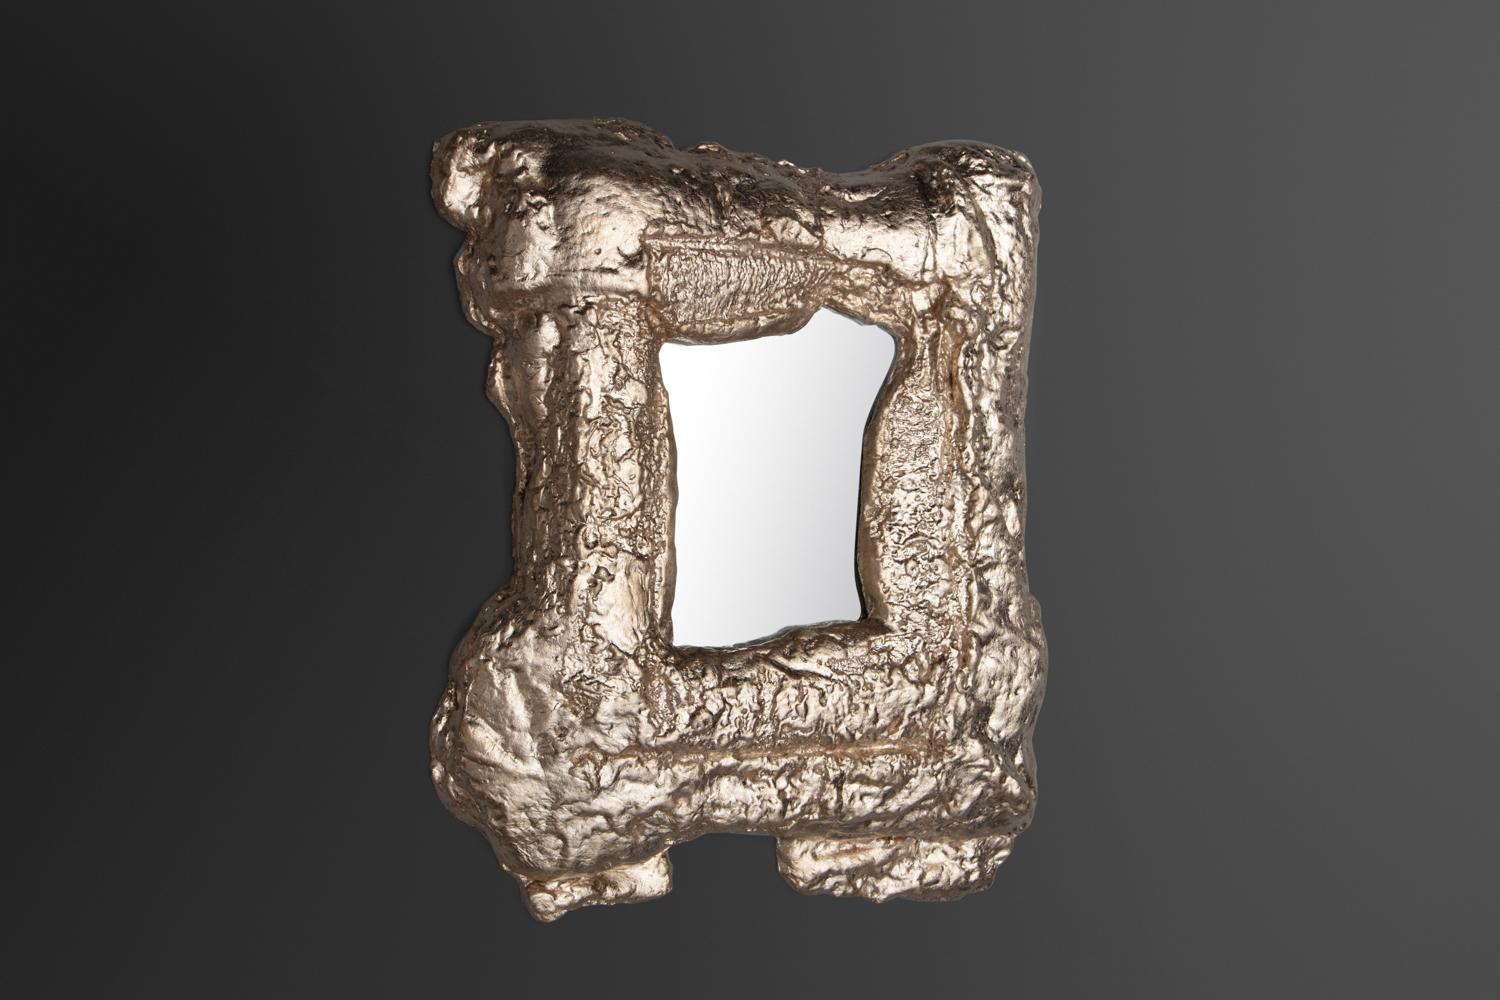 Moon gold gilded cast plaster with a mirror plate.